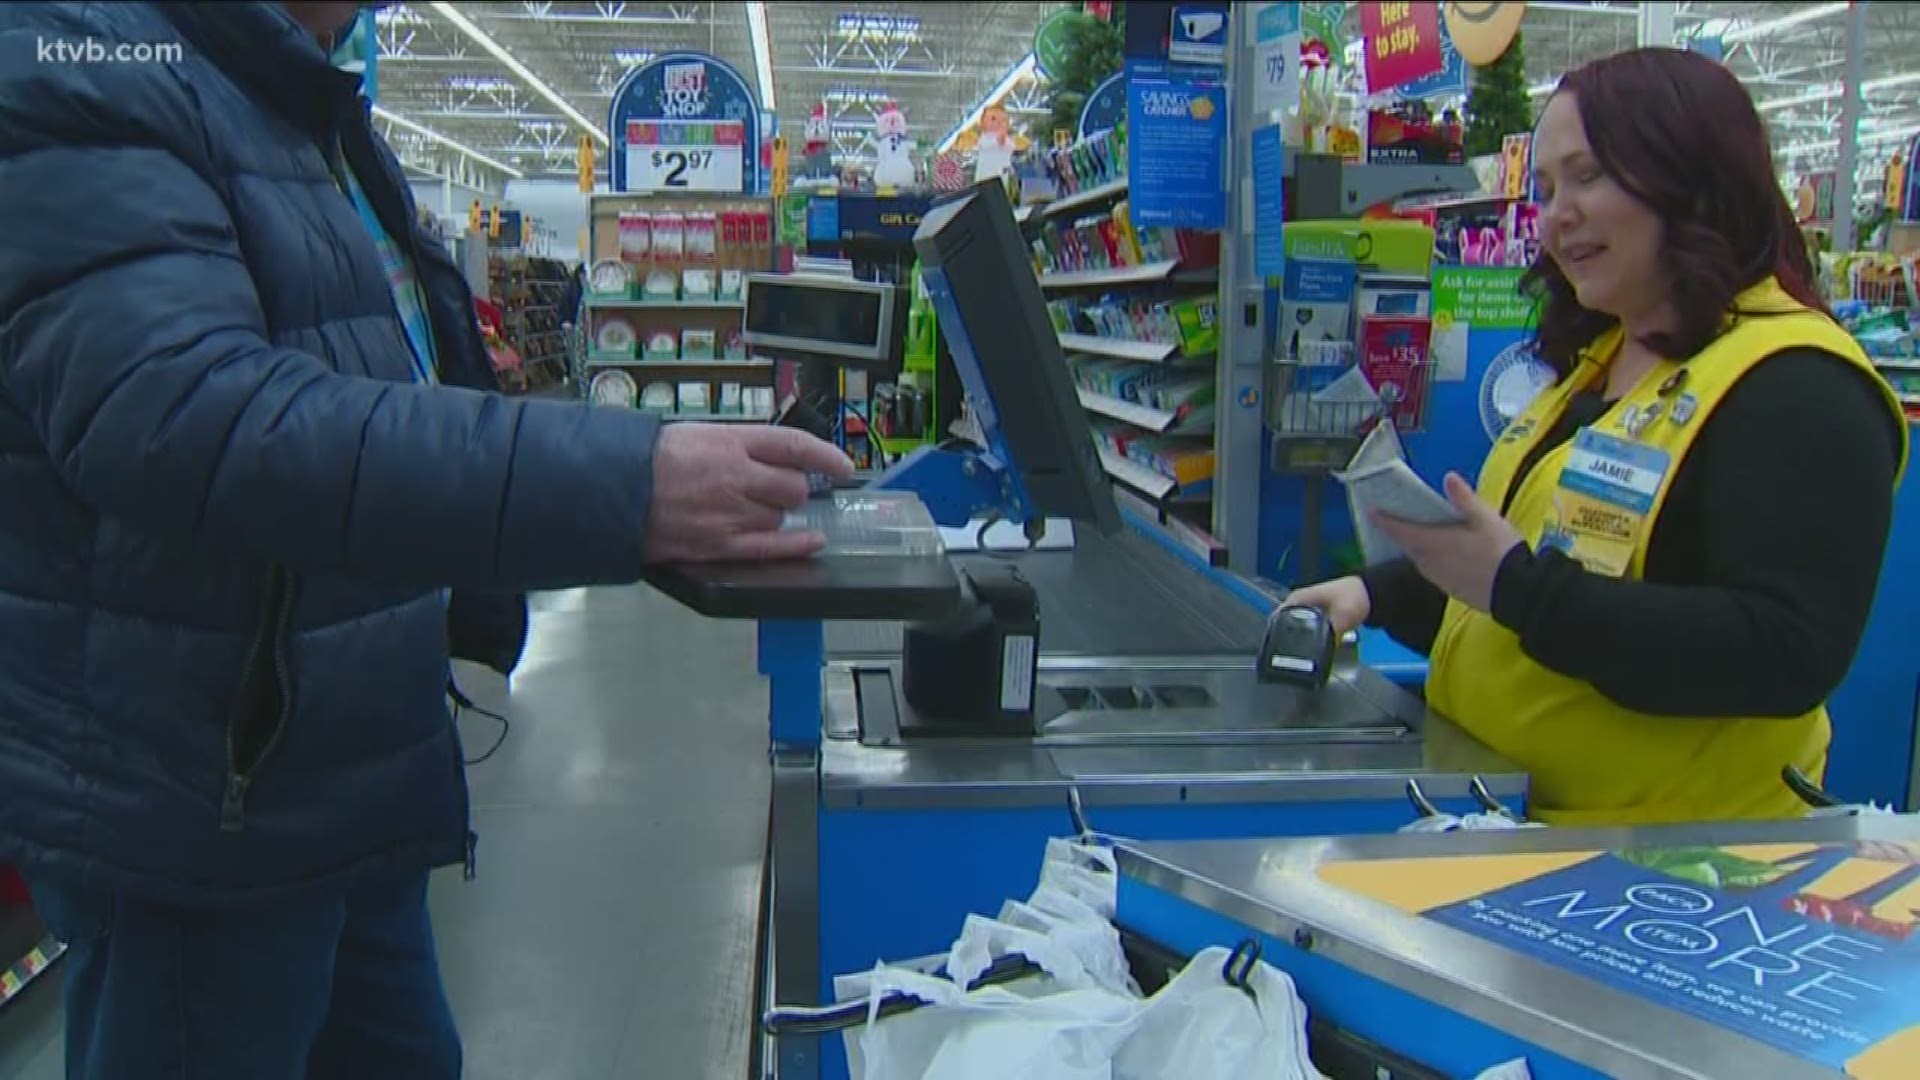 For the eighth year in a row, an anonymous man paid off layaway bills for families in need.